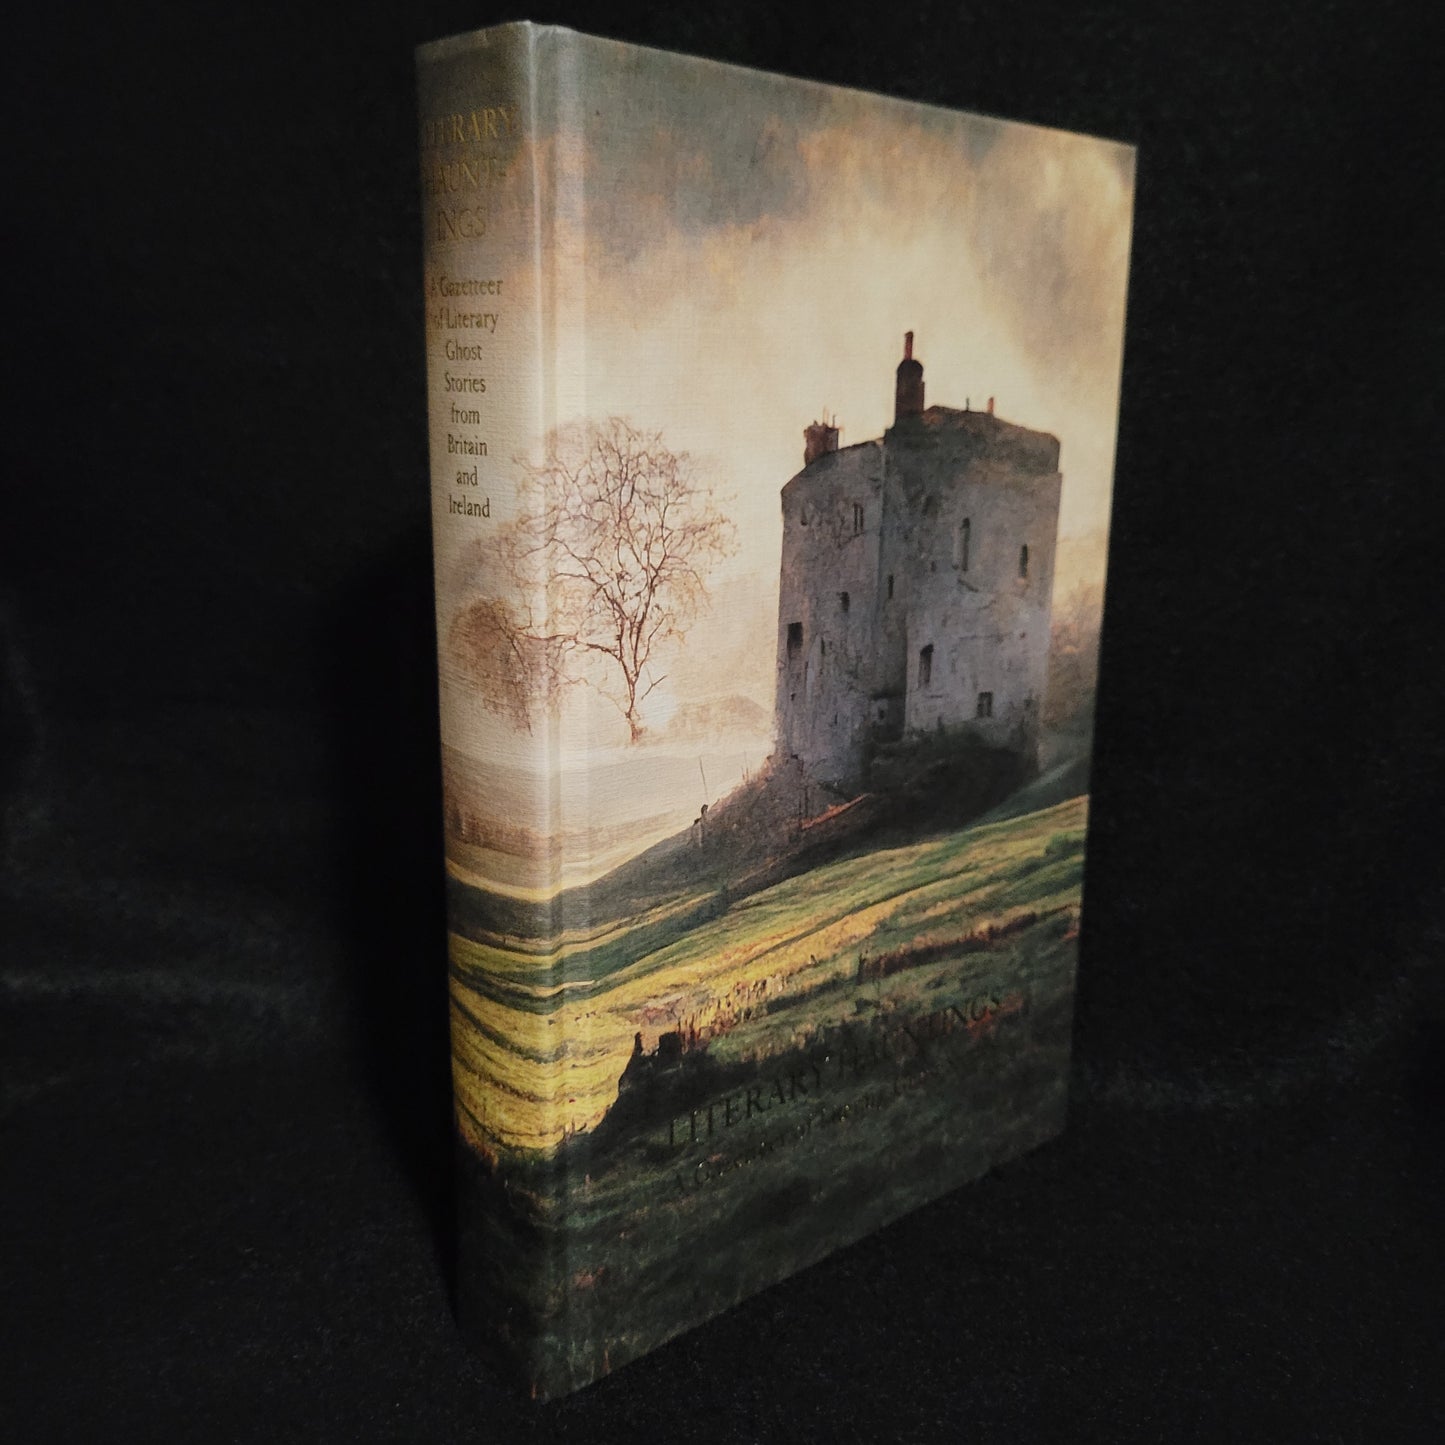 Literary Hauntings: A Gazeteer of Literary Ghost Stories from Britain and Ireland edited by R.B. Russell, Rosalie Parker, and Mark Valentine (Tartarus Press, 2023) Limited Edition Hardcover